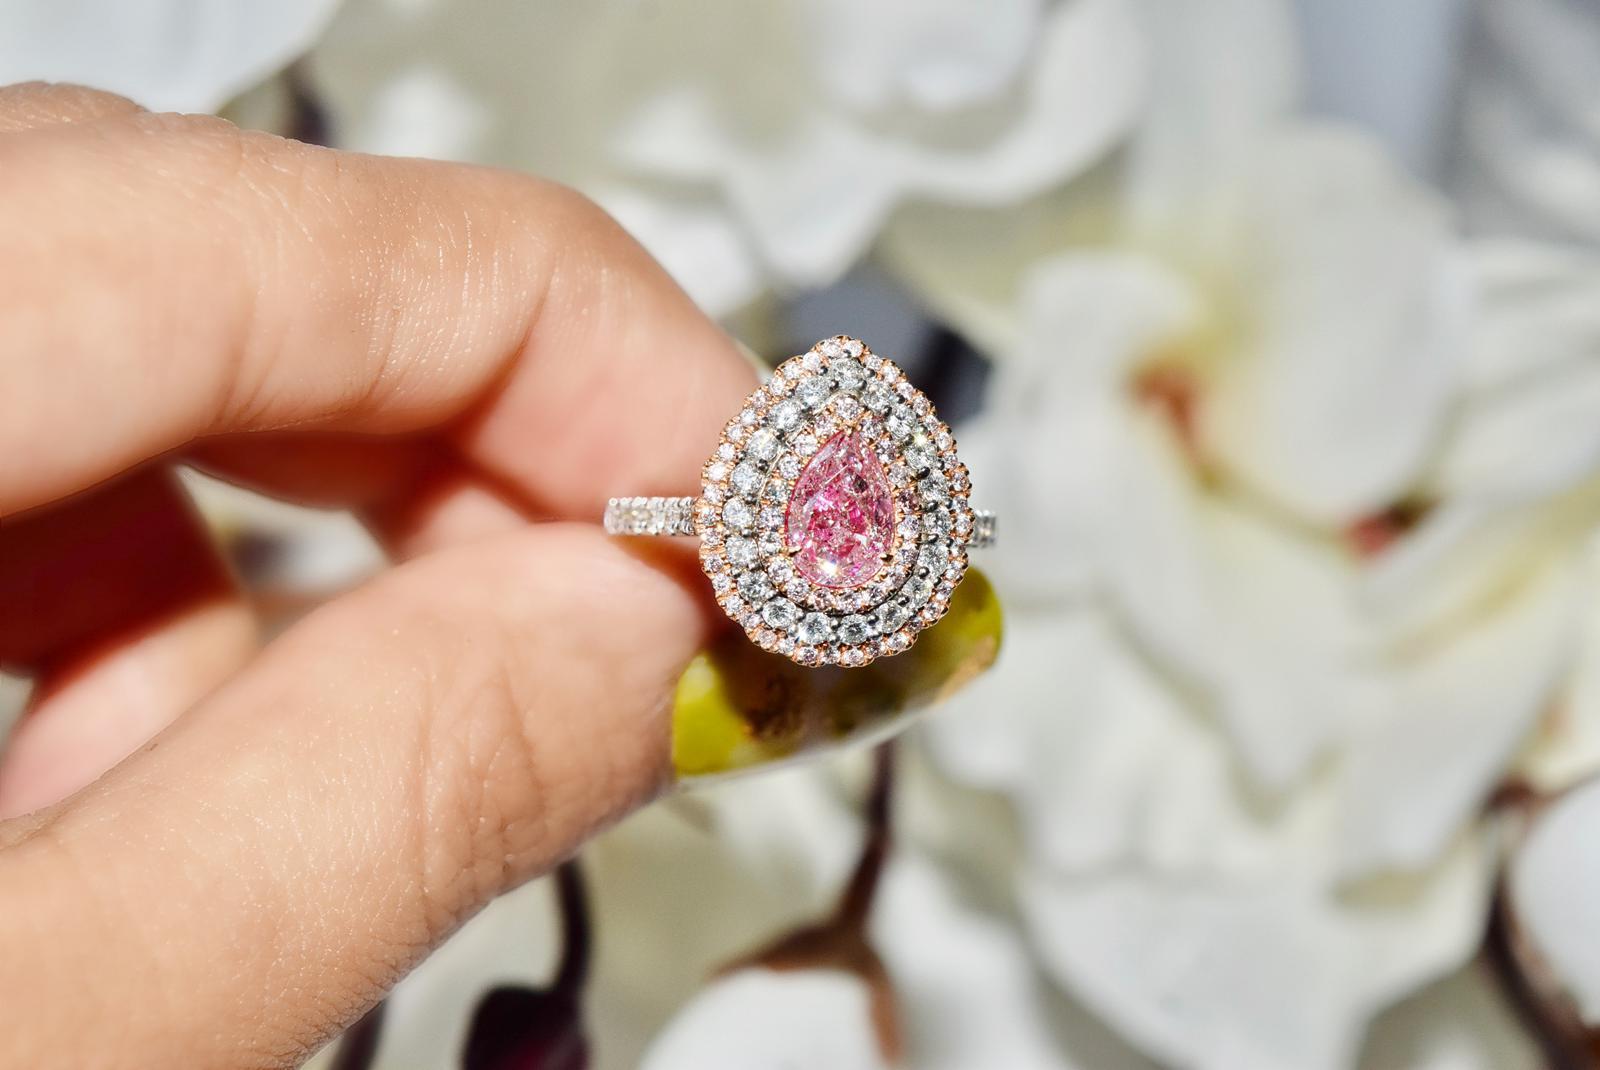 **100% NATURAL FANCY COLOUR DIAMOND JEWELLERY**

✪ Jewelry Details ✪

♦ MAIN STONE DETAILS

➛ Stone Shape: Pear
➛ Stone Color: Light Pinkish Brown
➛ Stone Weight: 1.00 carats
➛ Clarity: I1
➛ GIA certified

♦ SIDE STONE DETAILS

➛ Side White diamonds